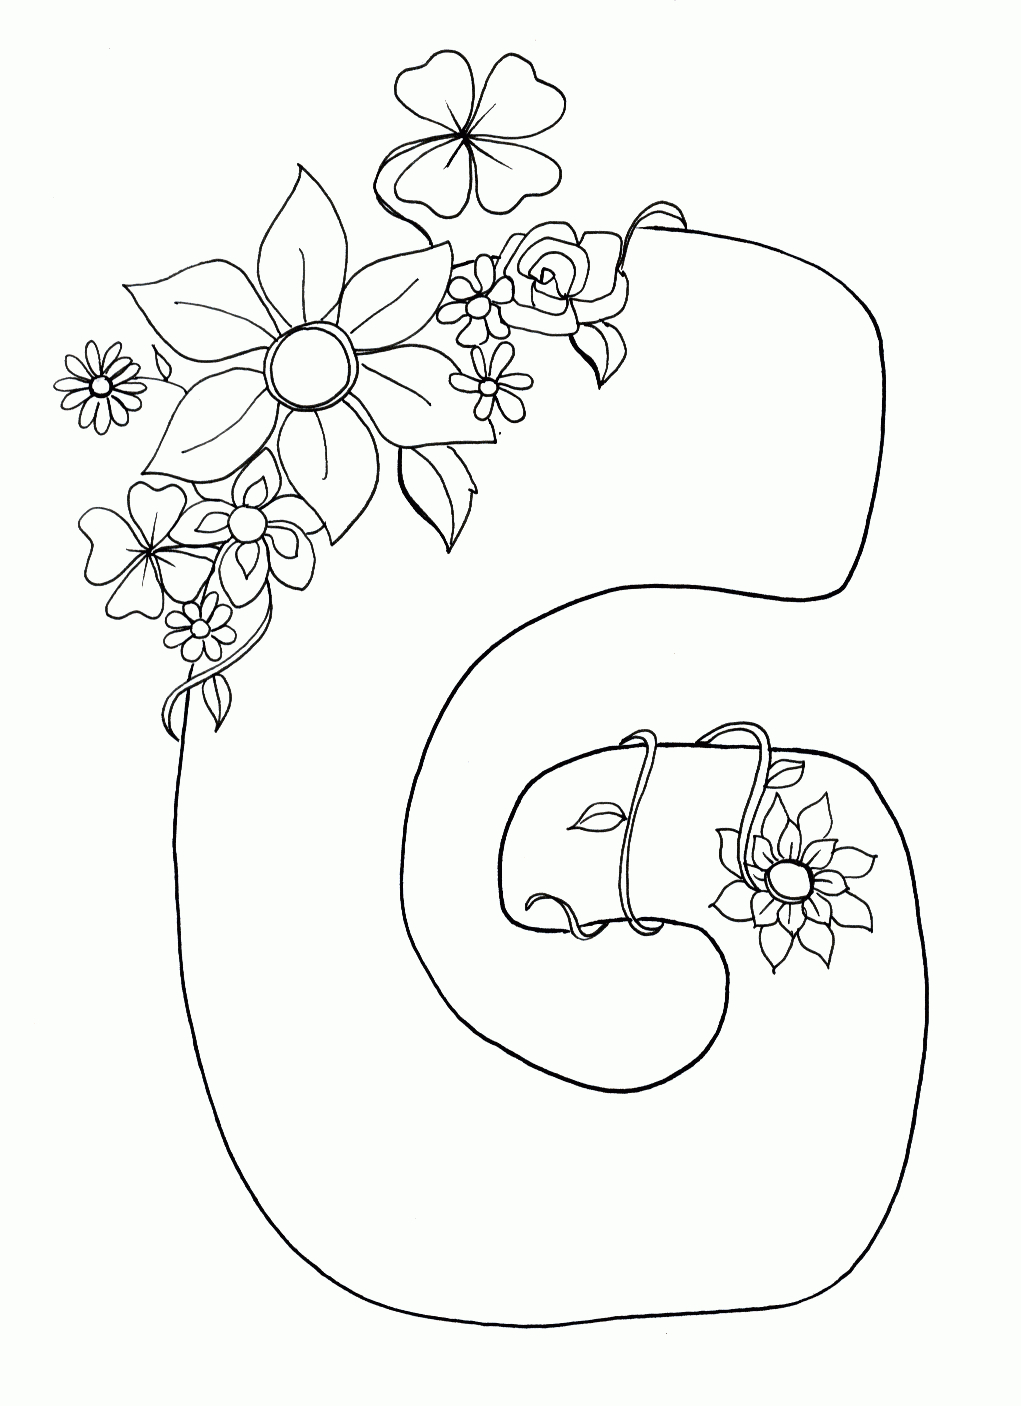 Free Printable Tropical Fish Coloring Pages | Embroidery 2 | Free - Free Printable Letter G Coloring Pages